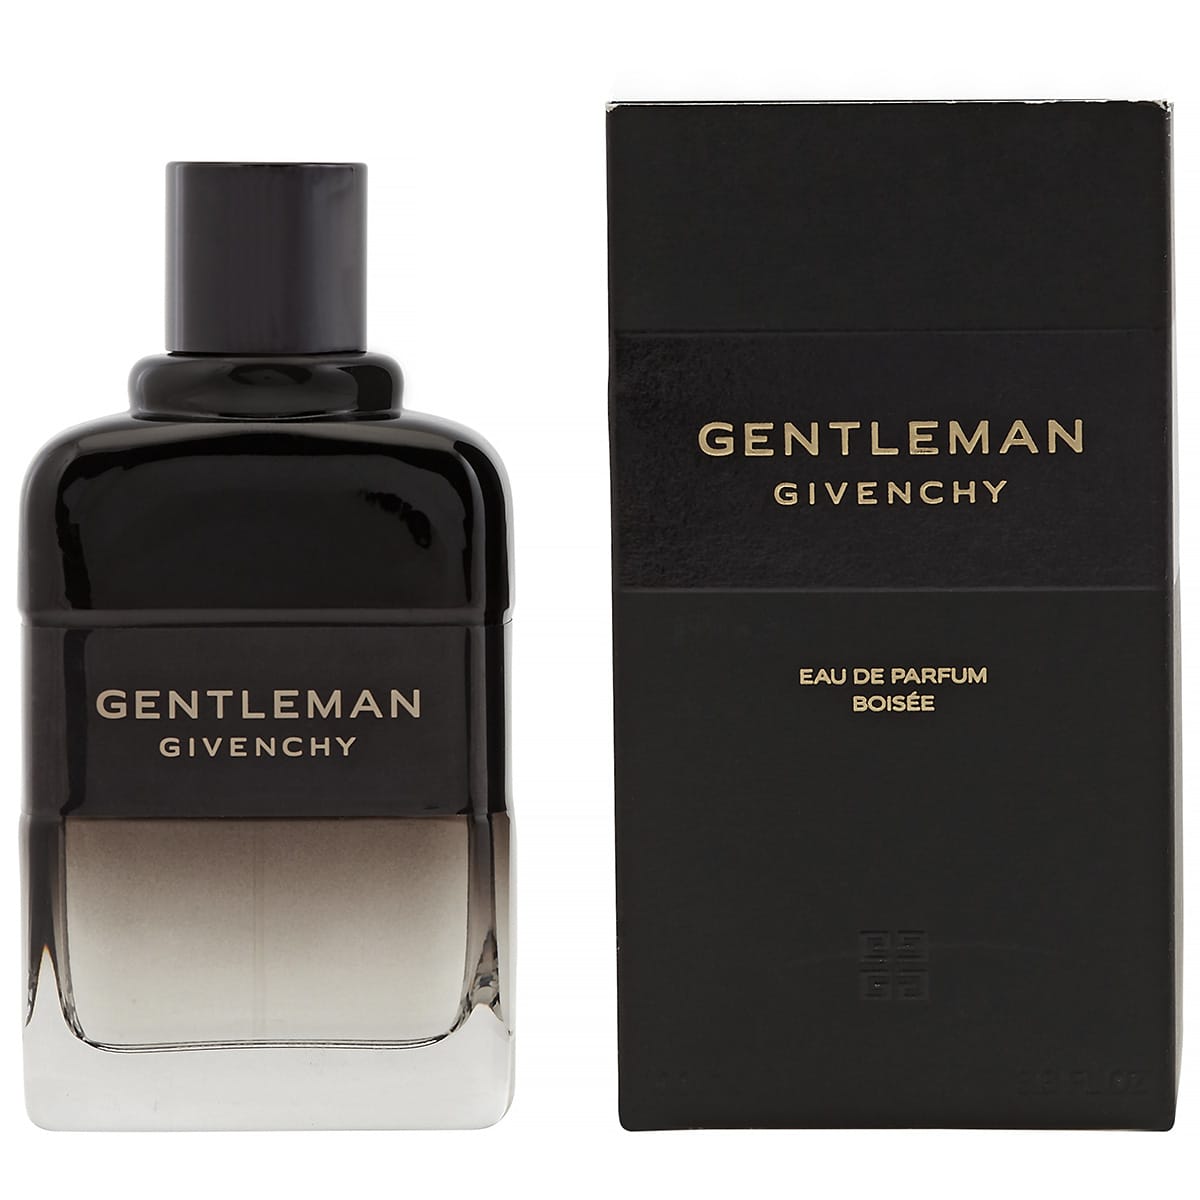 The Best Men's Colognes from Givenchy